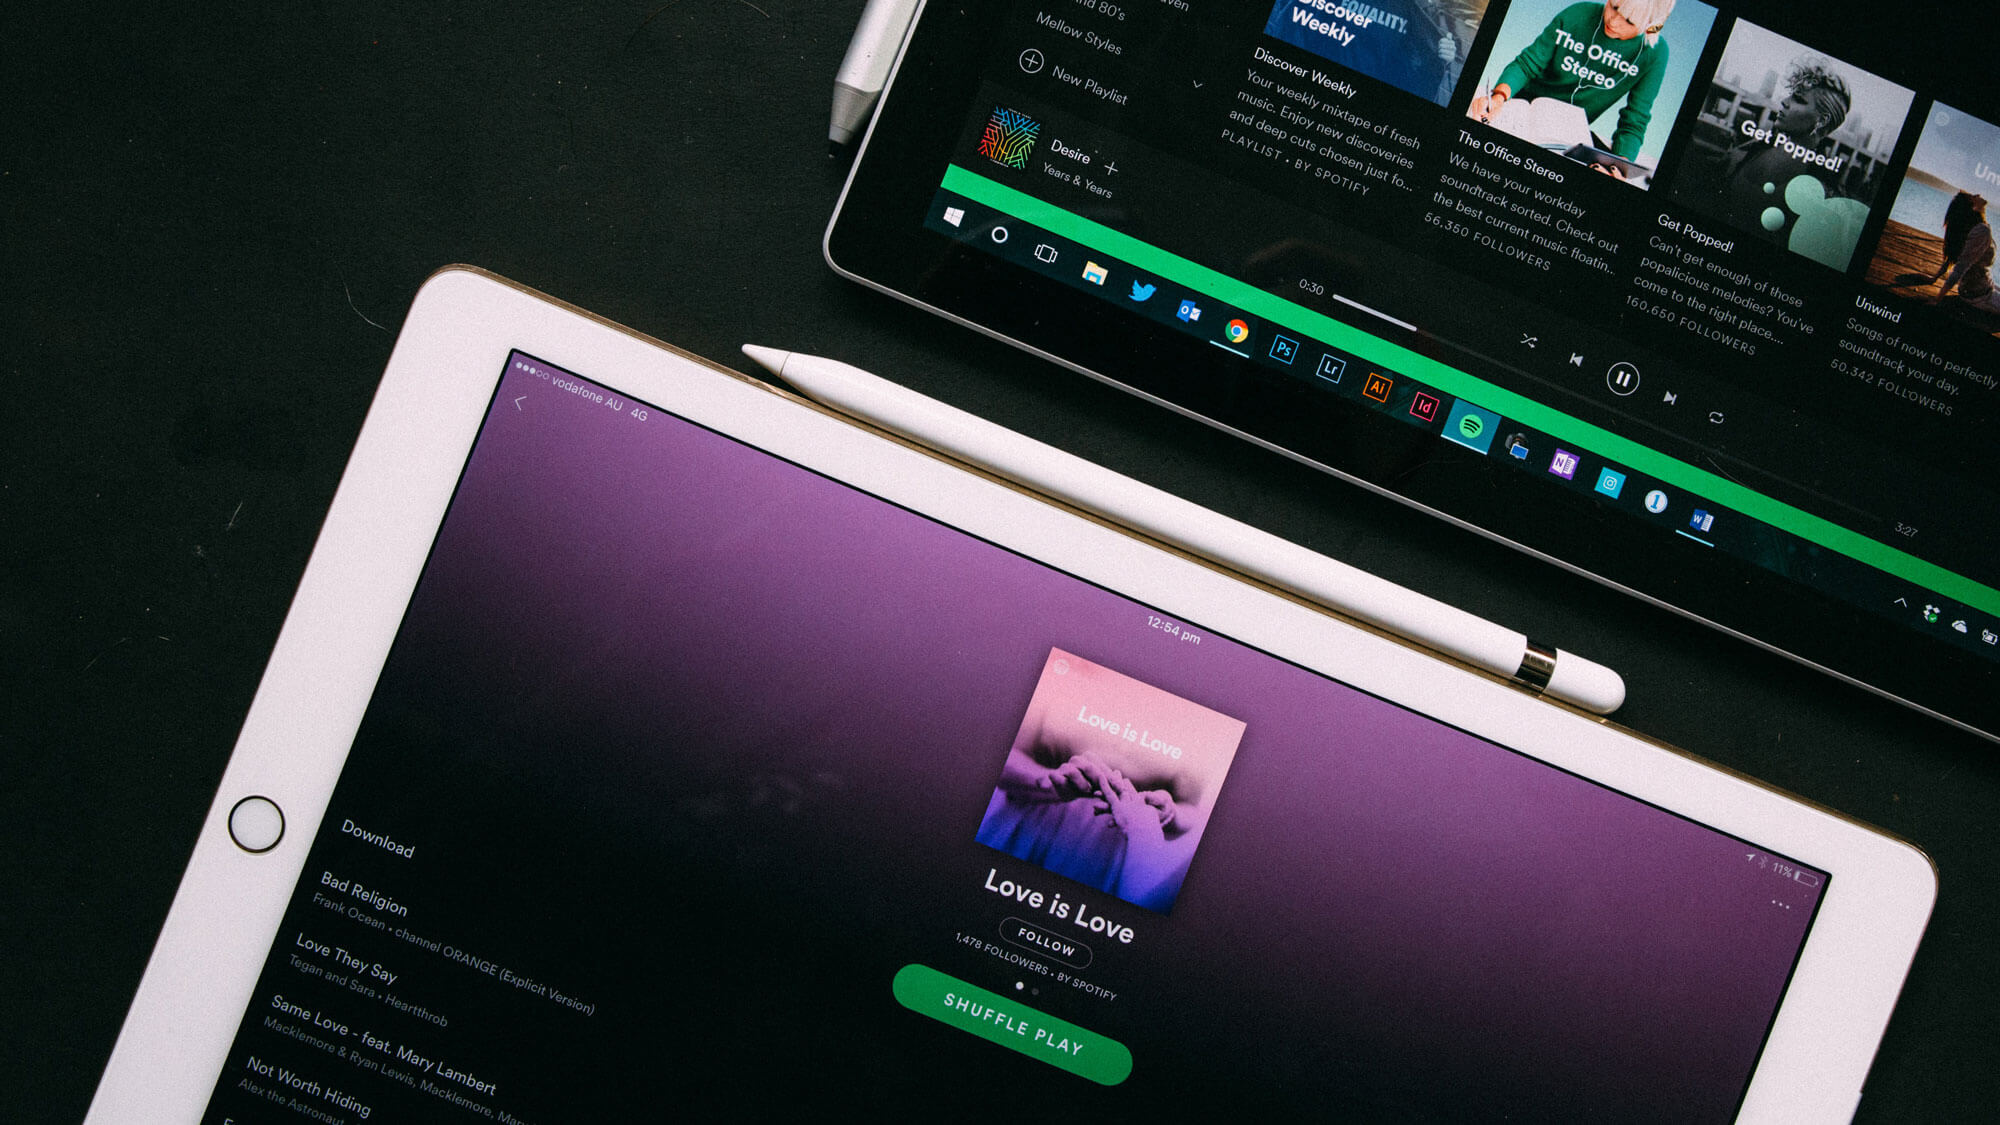 Spotify uses the freemium business model